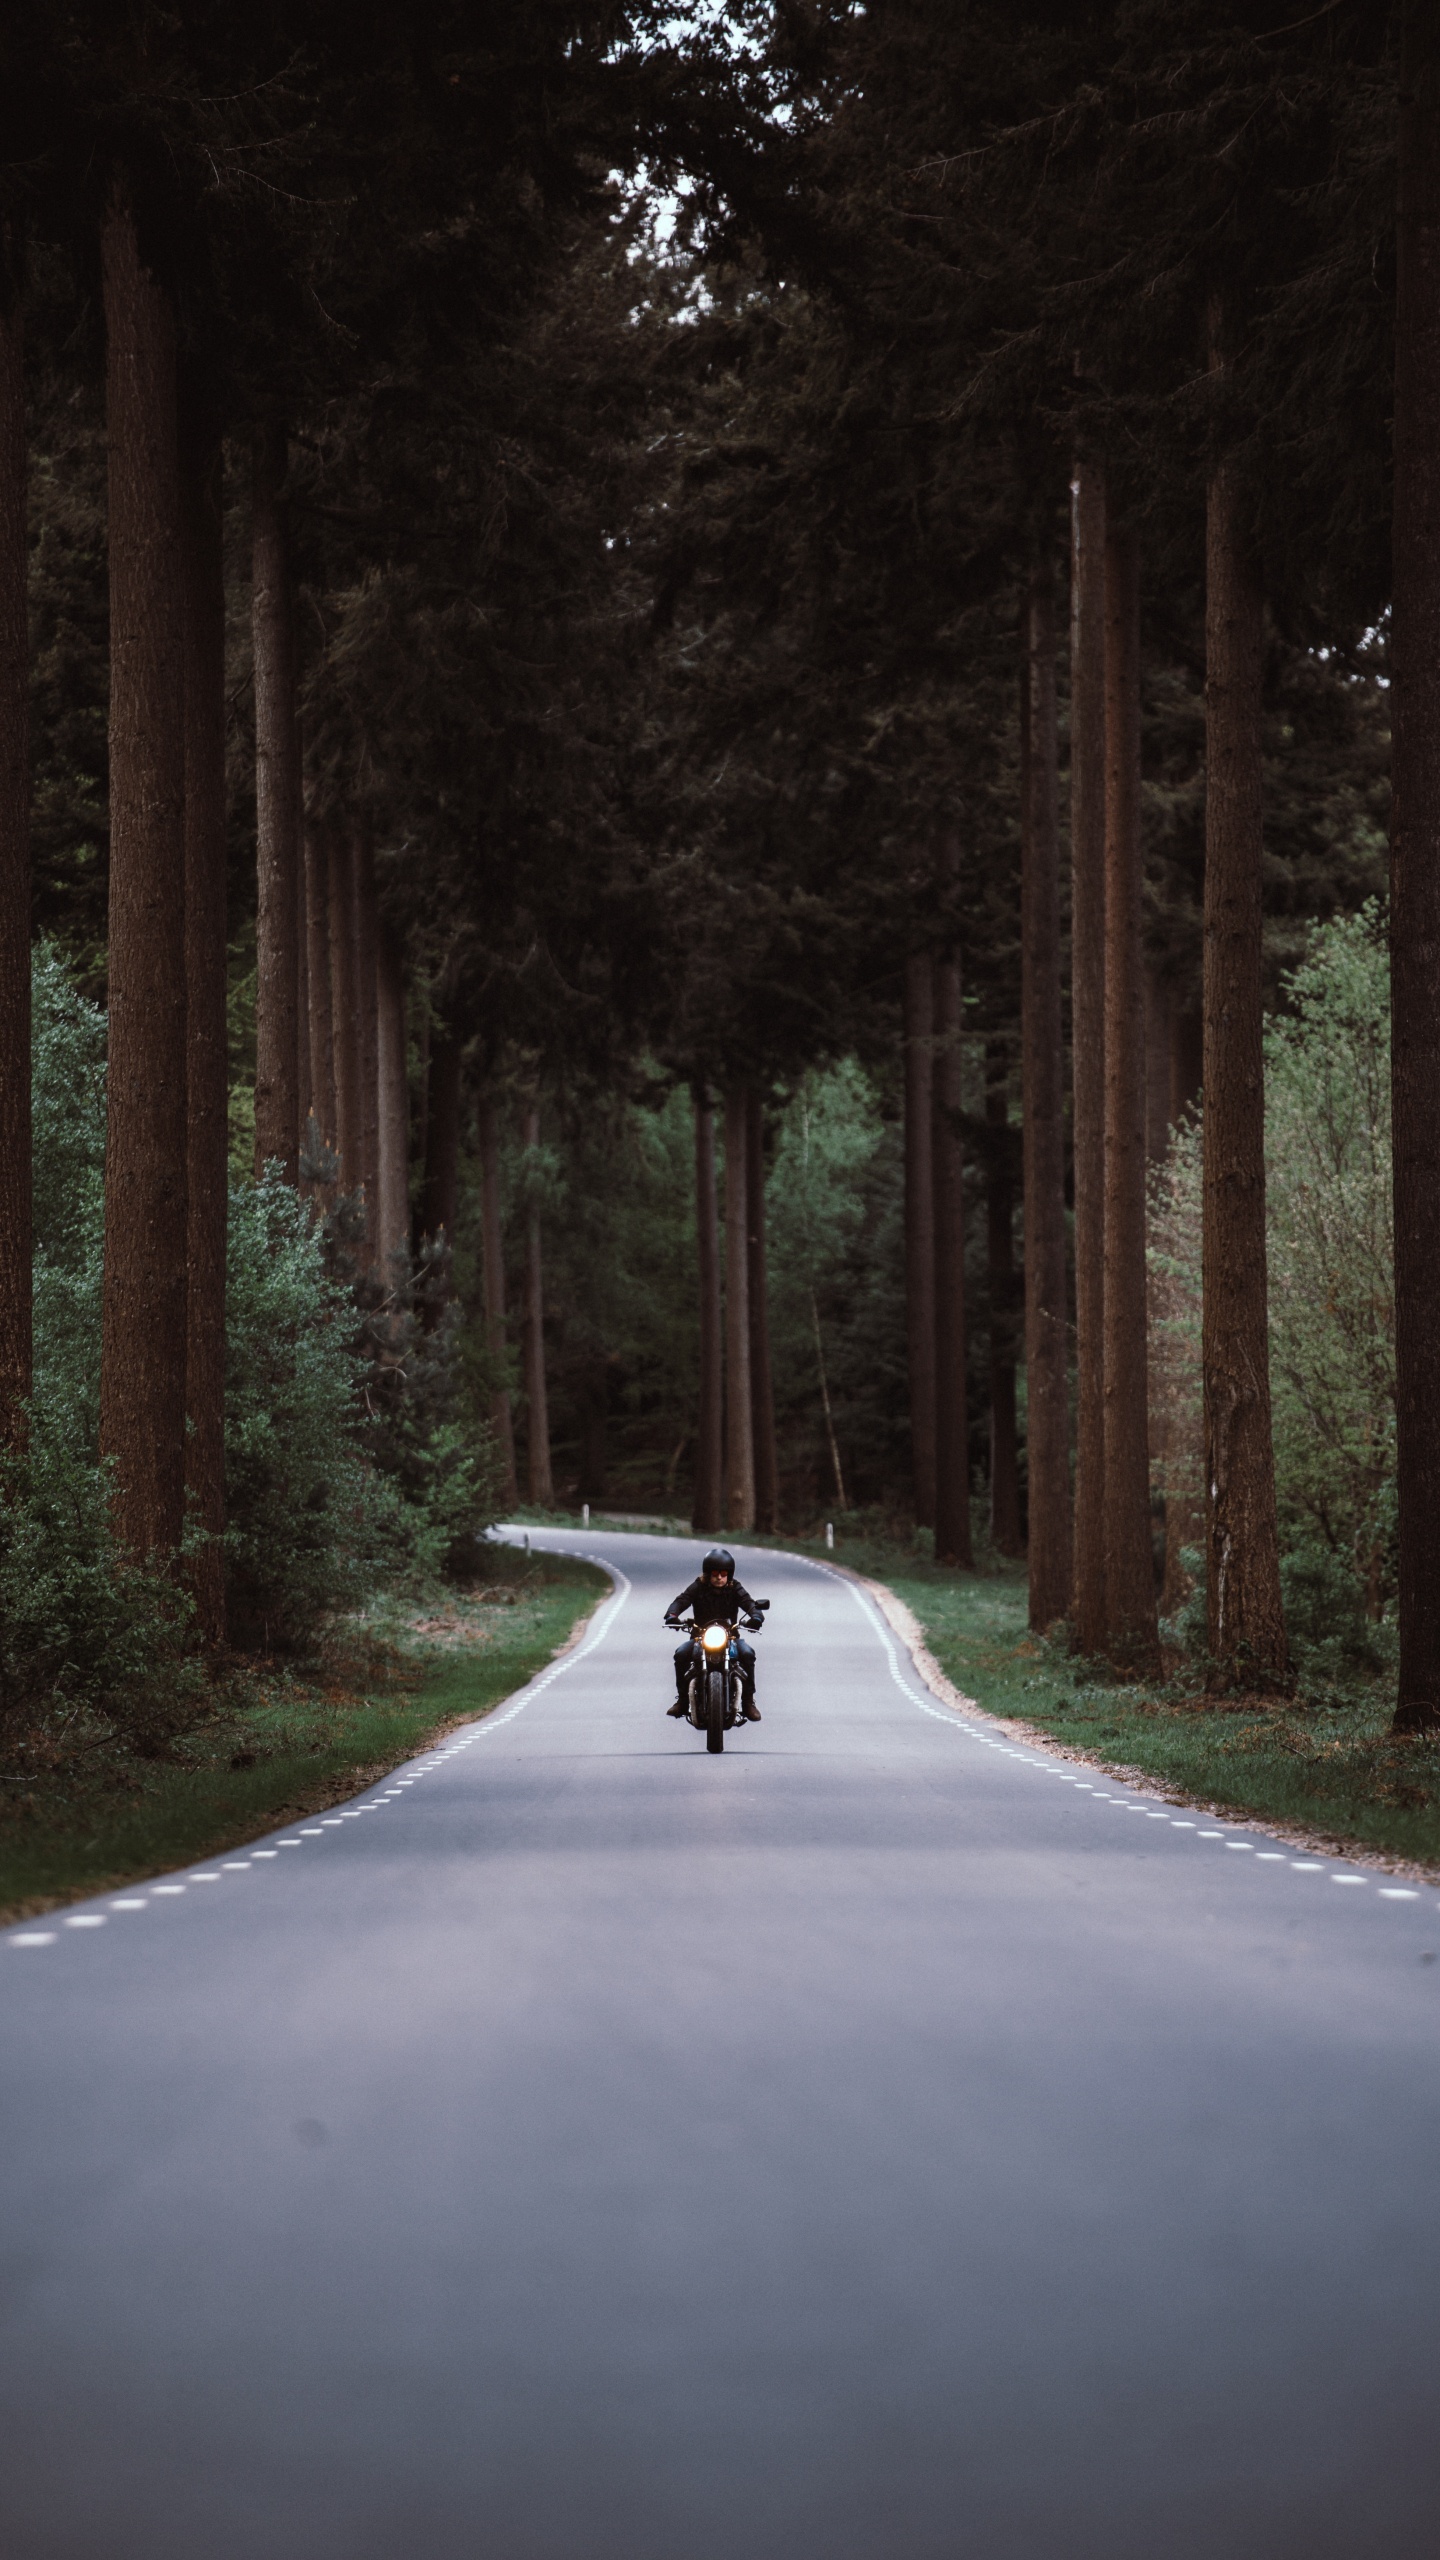 Person Riding Motorcycle on Road Between Trees During Daytime. Wallpaper in 1440x2560 Resolution